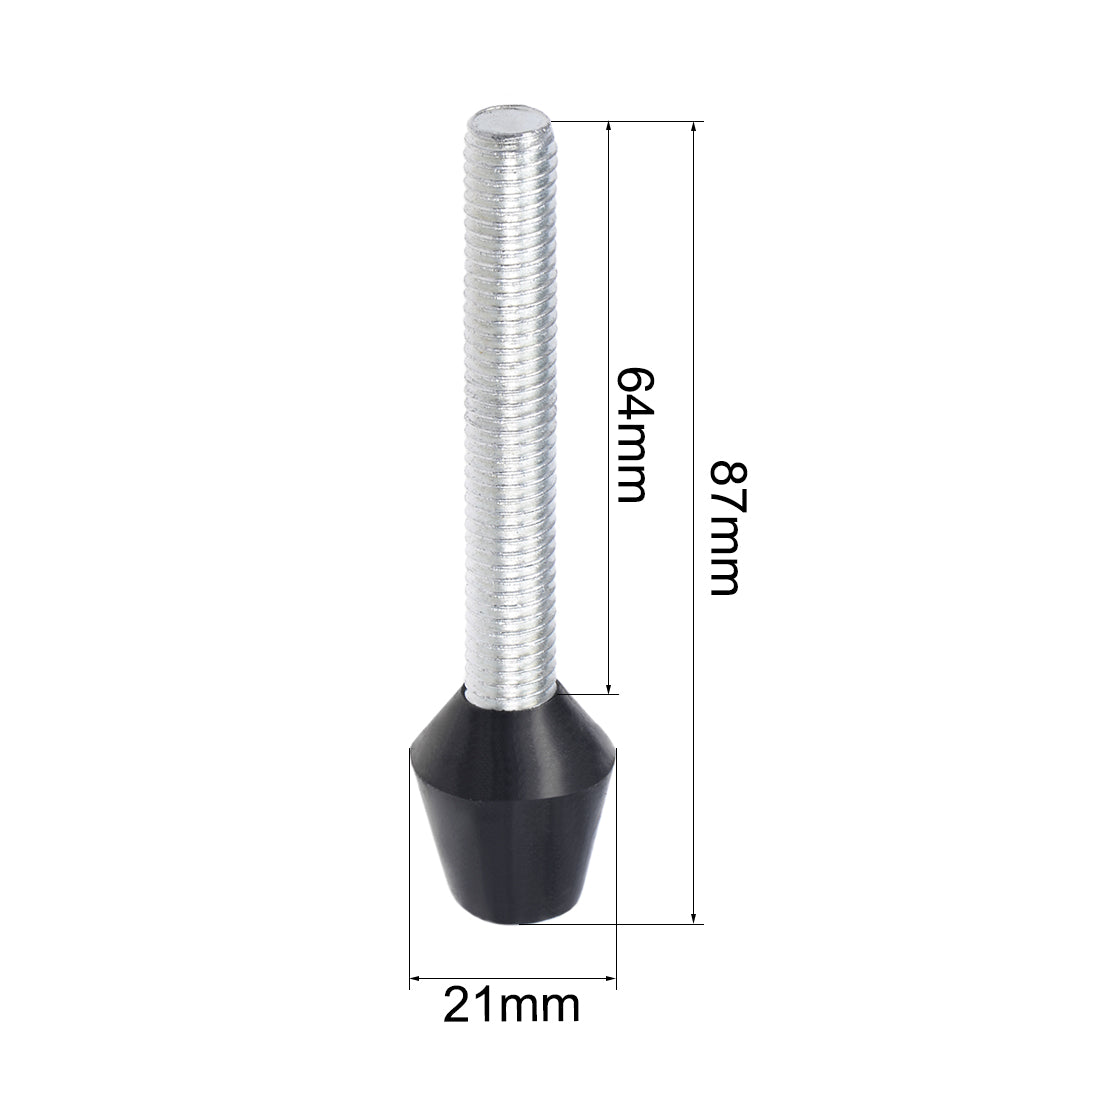 uxcell Uxcell M10x87mm Carbon Steel Toggle Clamp Screw Assembly with Rounded Spindle Tip 2pcs